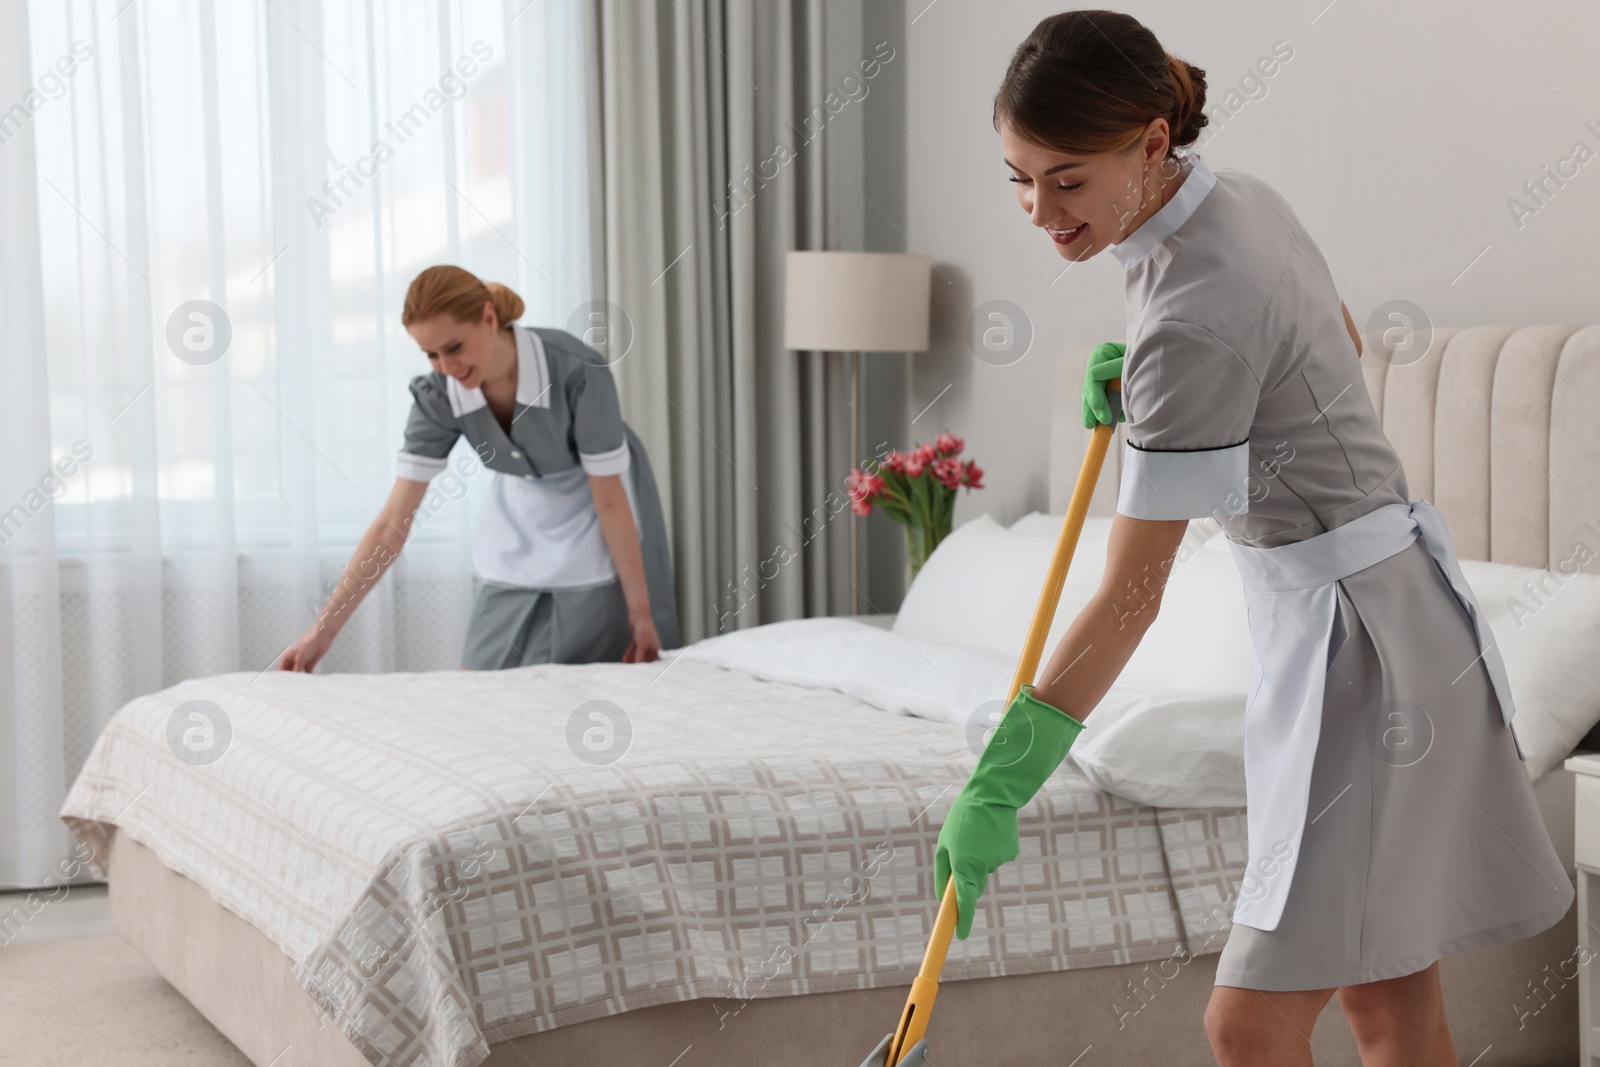 Photo of Professional chambermaids cleaning up bedroom in hotel